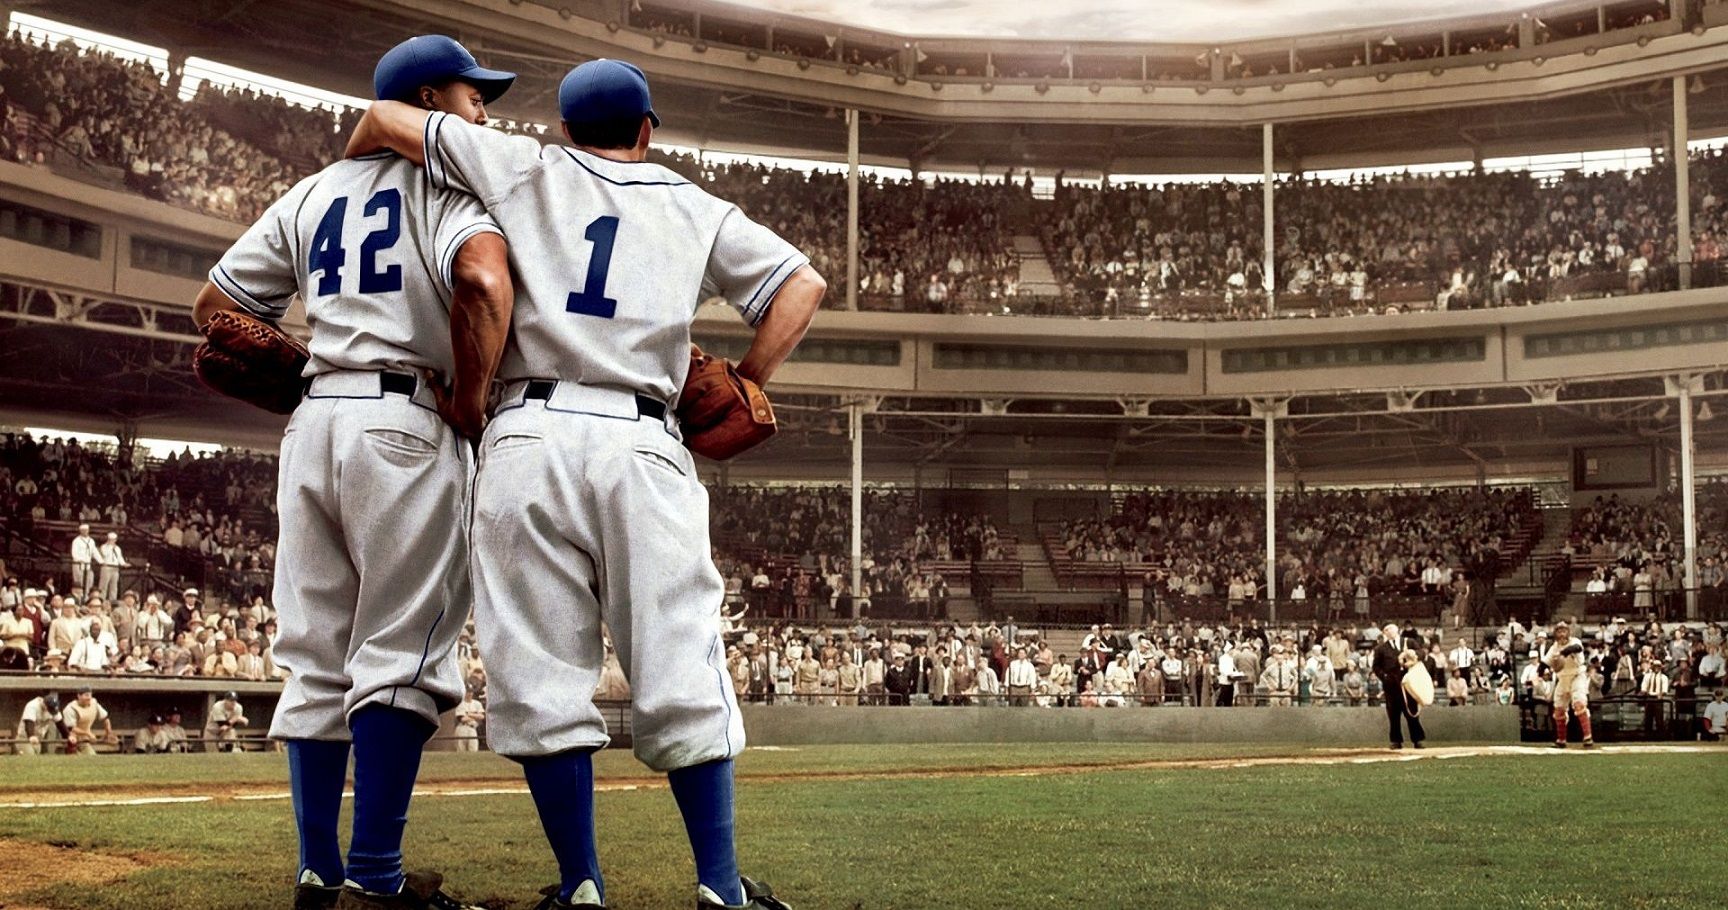 Top 10 Greatest Baseball Movies of All Time | TheRichest